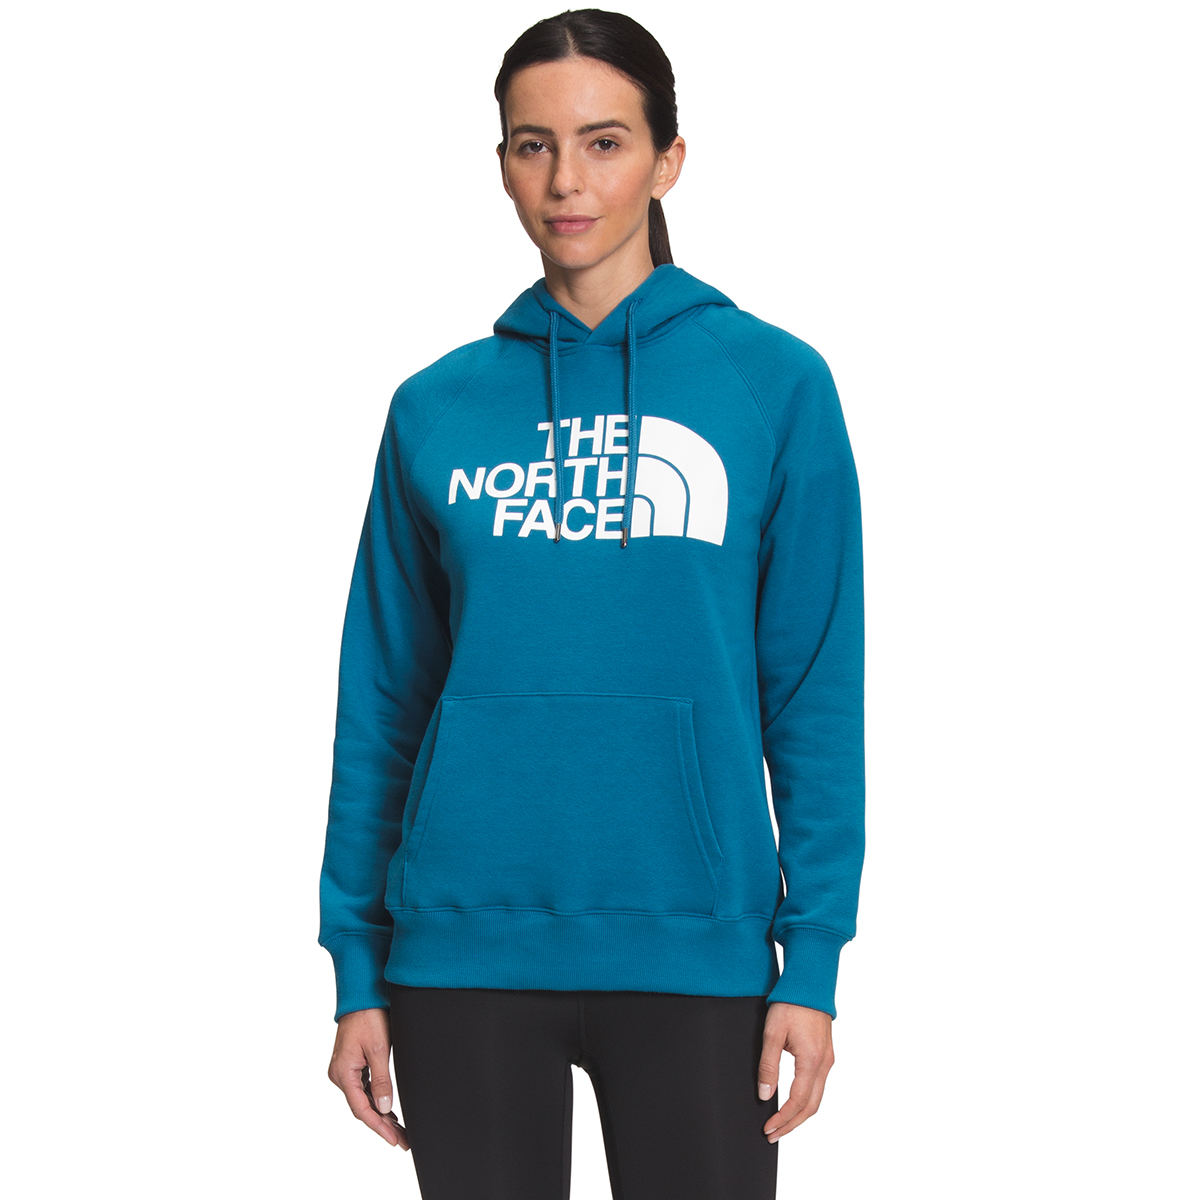 The North Face Women's Half Dome Pullover Hoodie - Size XL